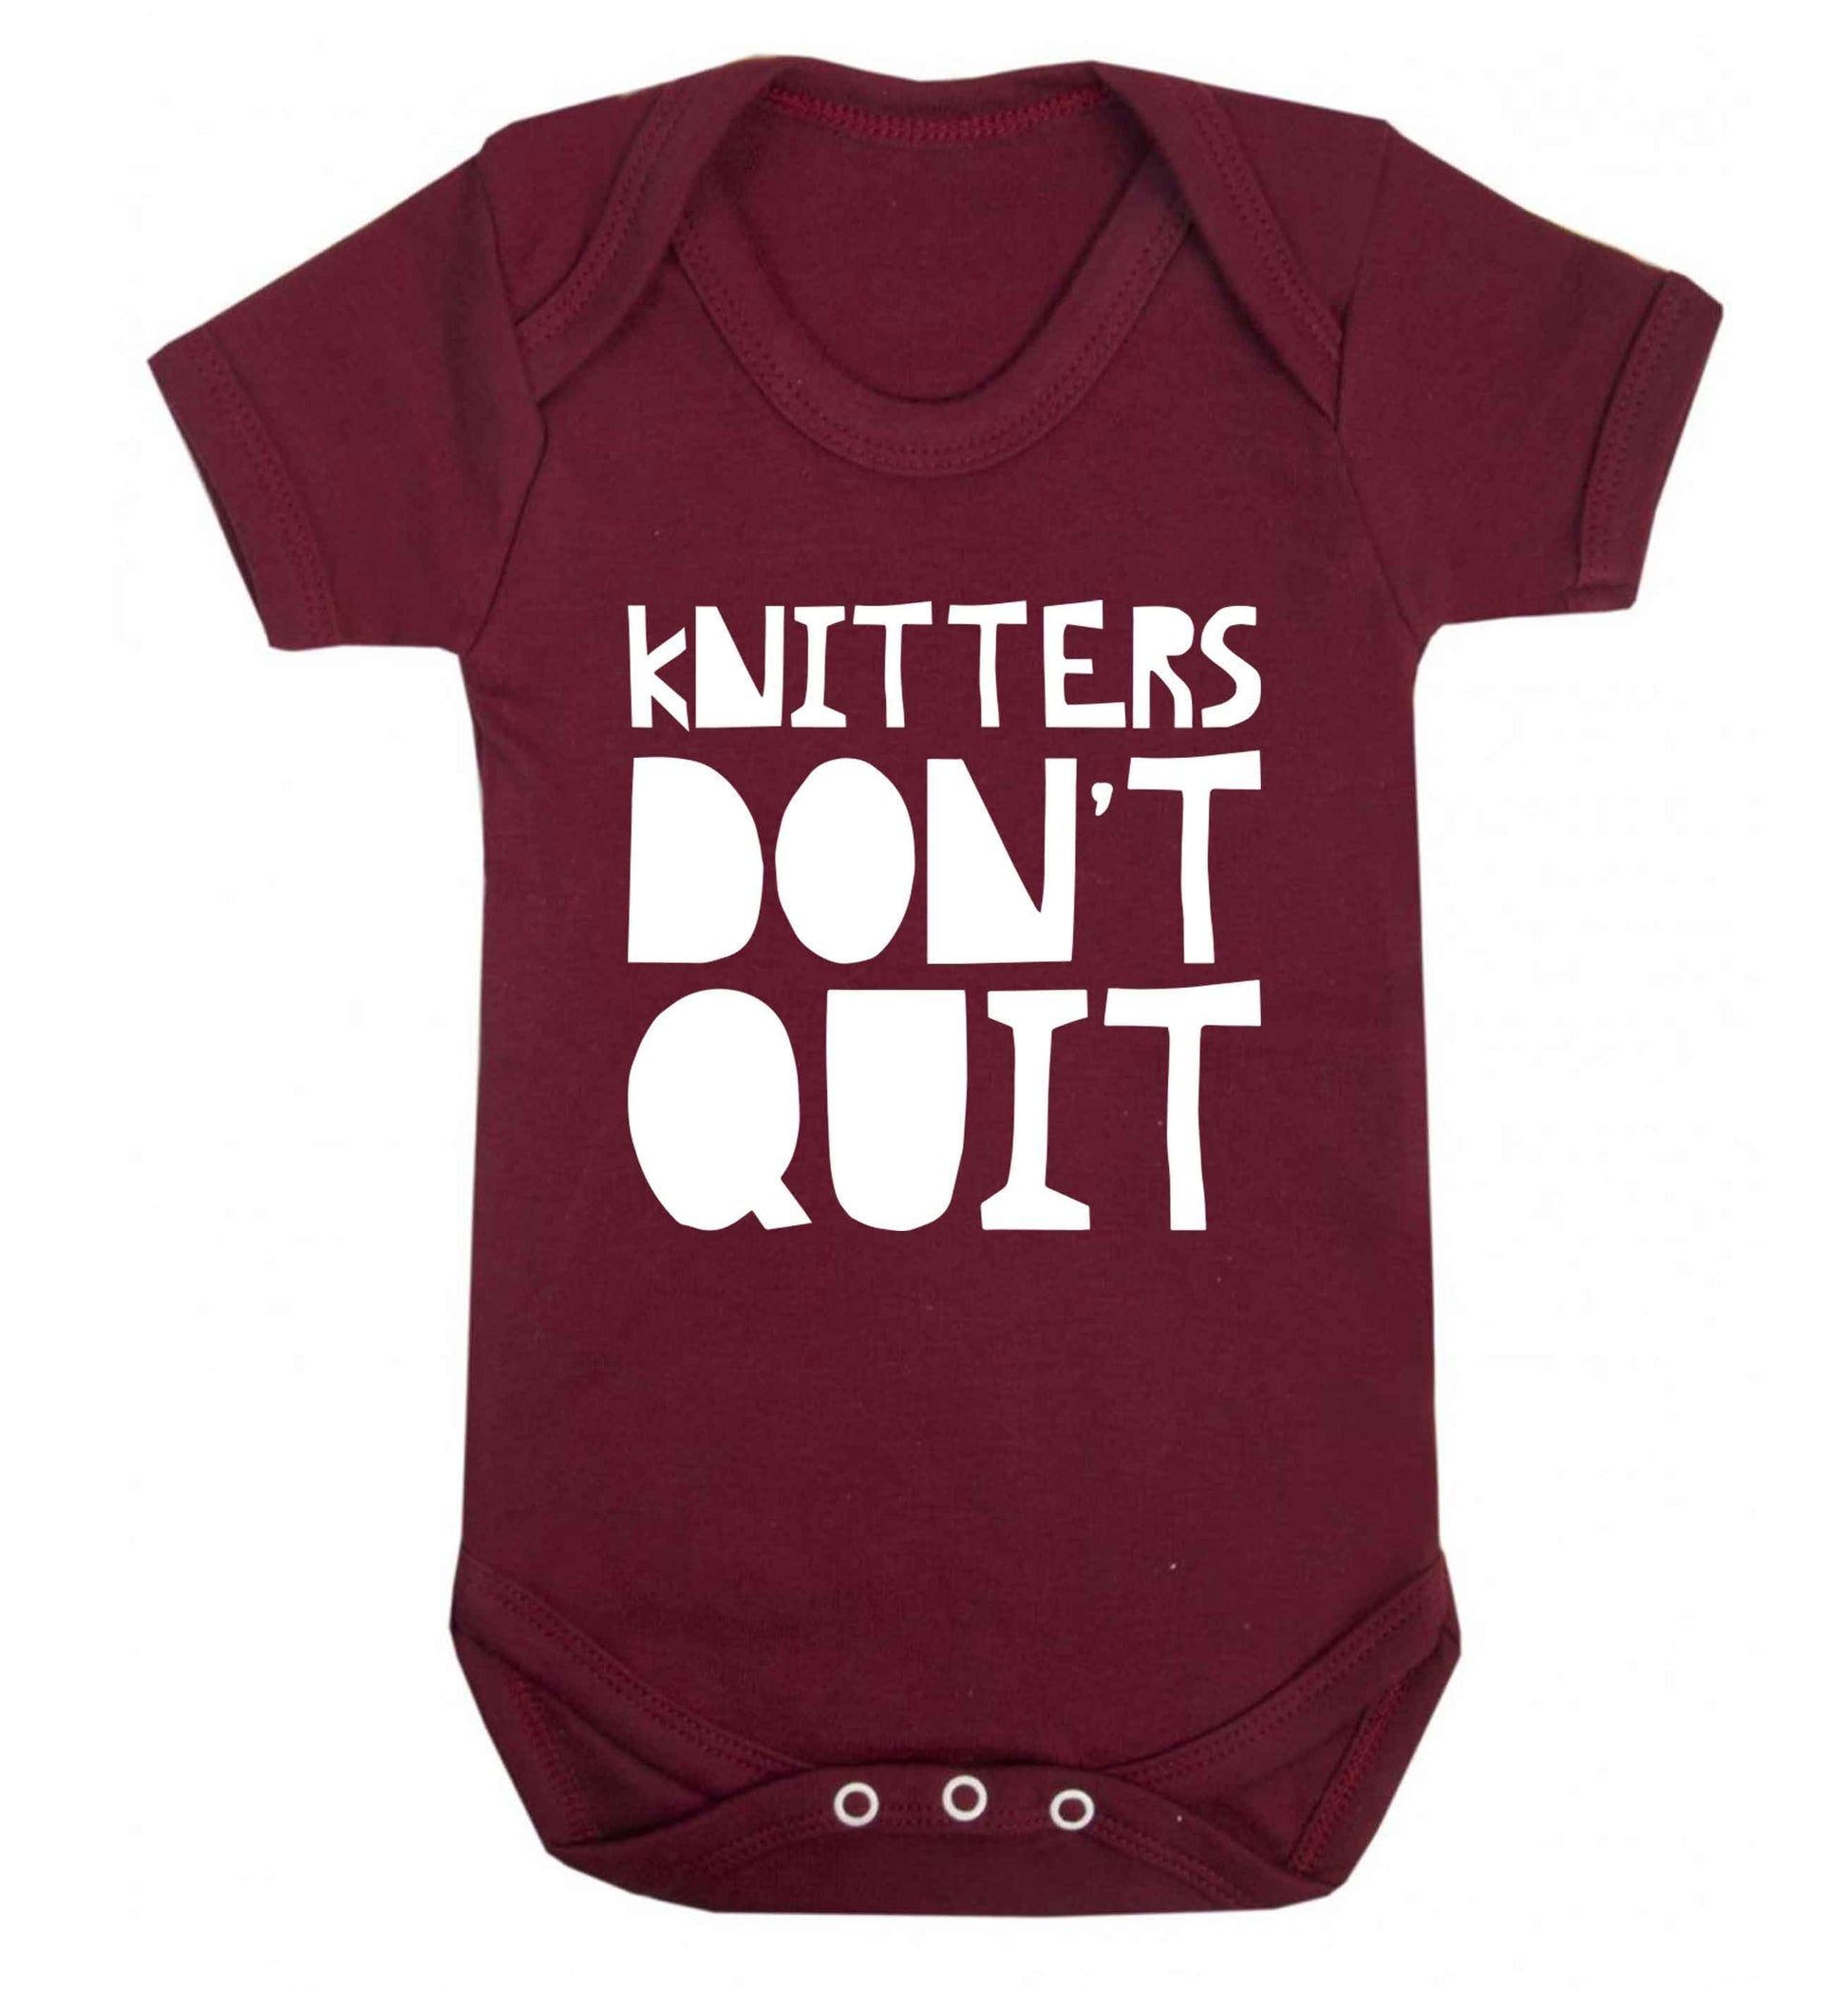 Knitters don't quit Baby Vest maroon 18-24 months